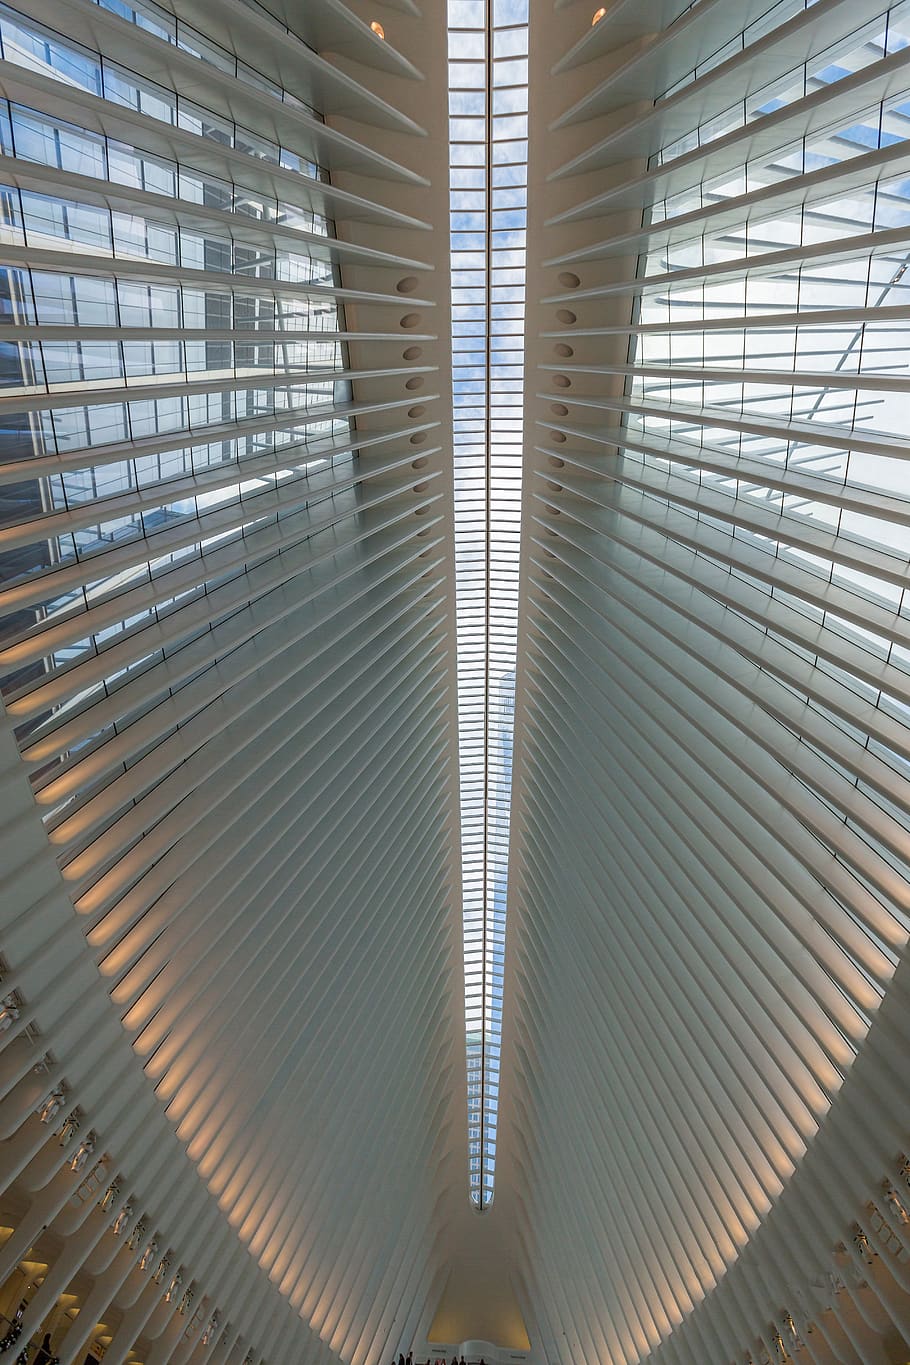 oculus station, usa, architecture, new york, united states, lockscreen wallpaper, indoors, pattern, metal, built structure